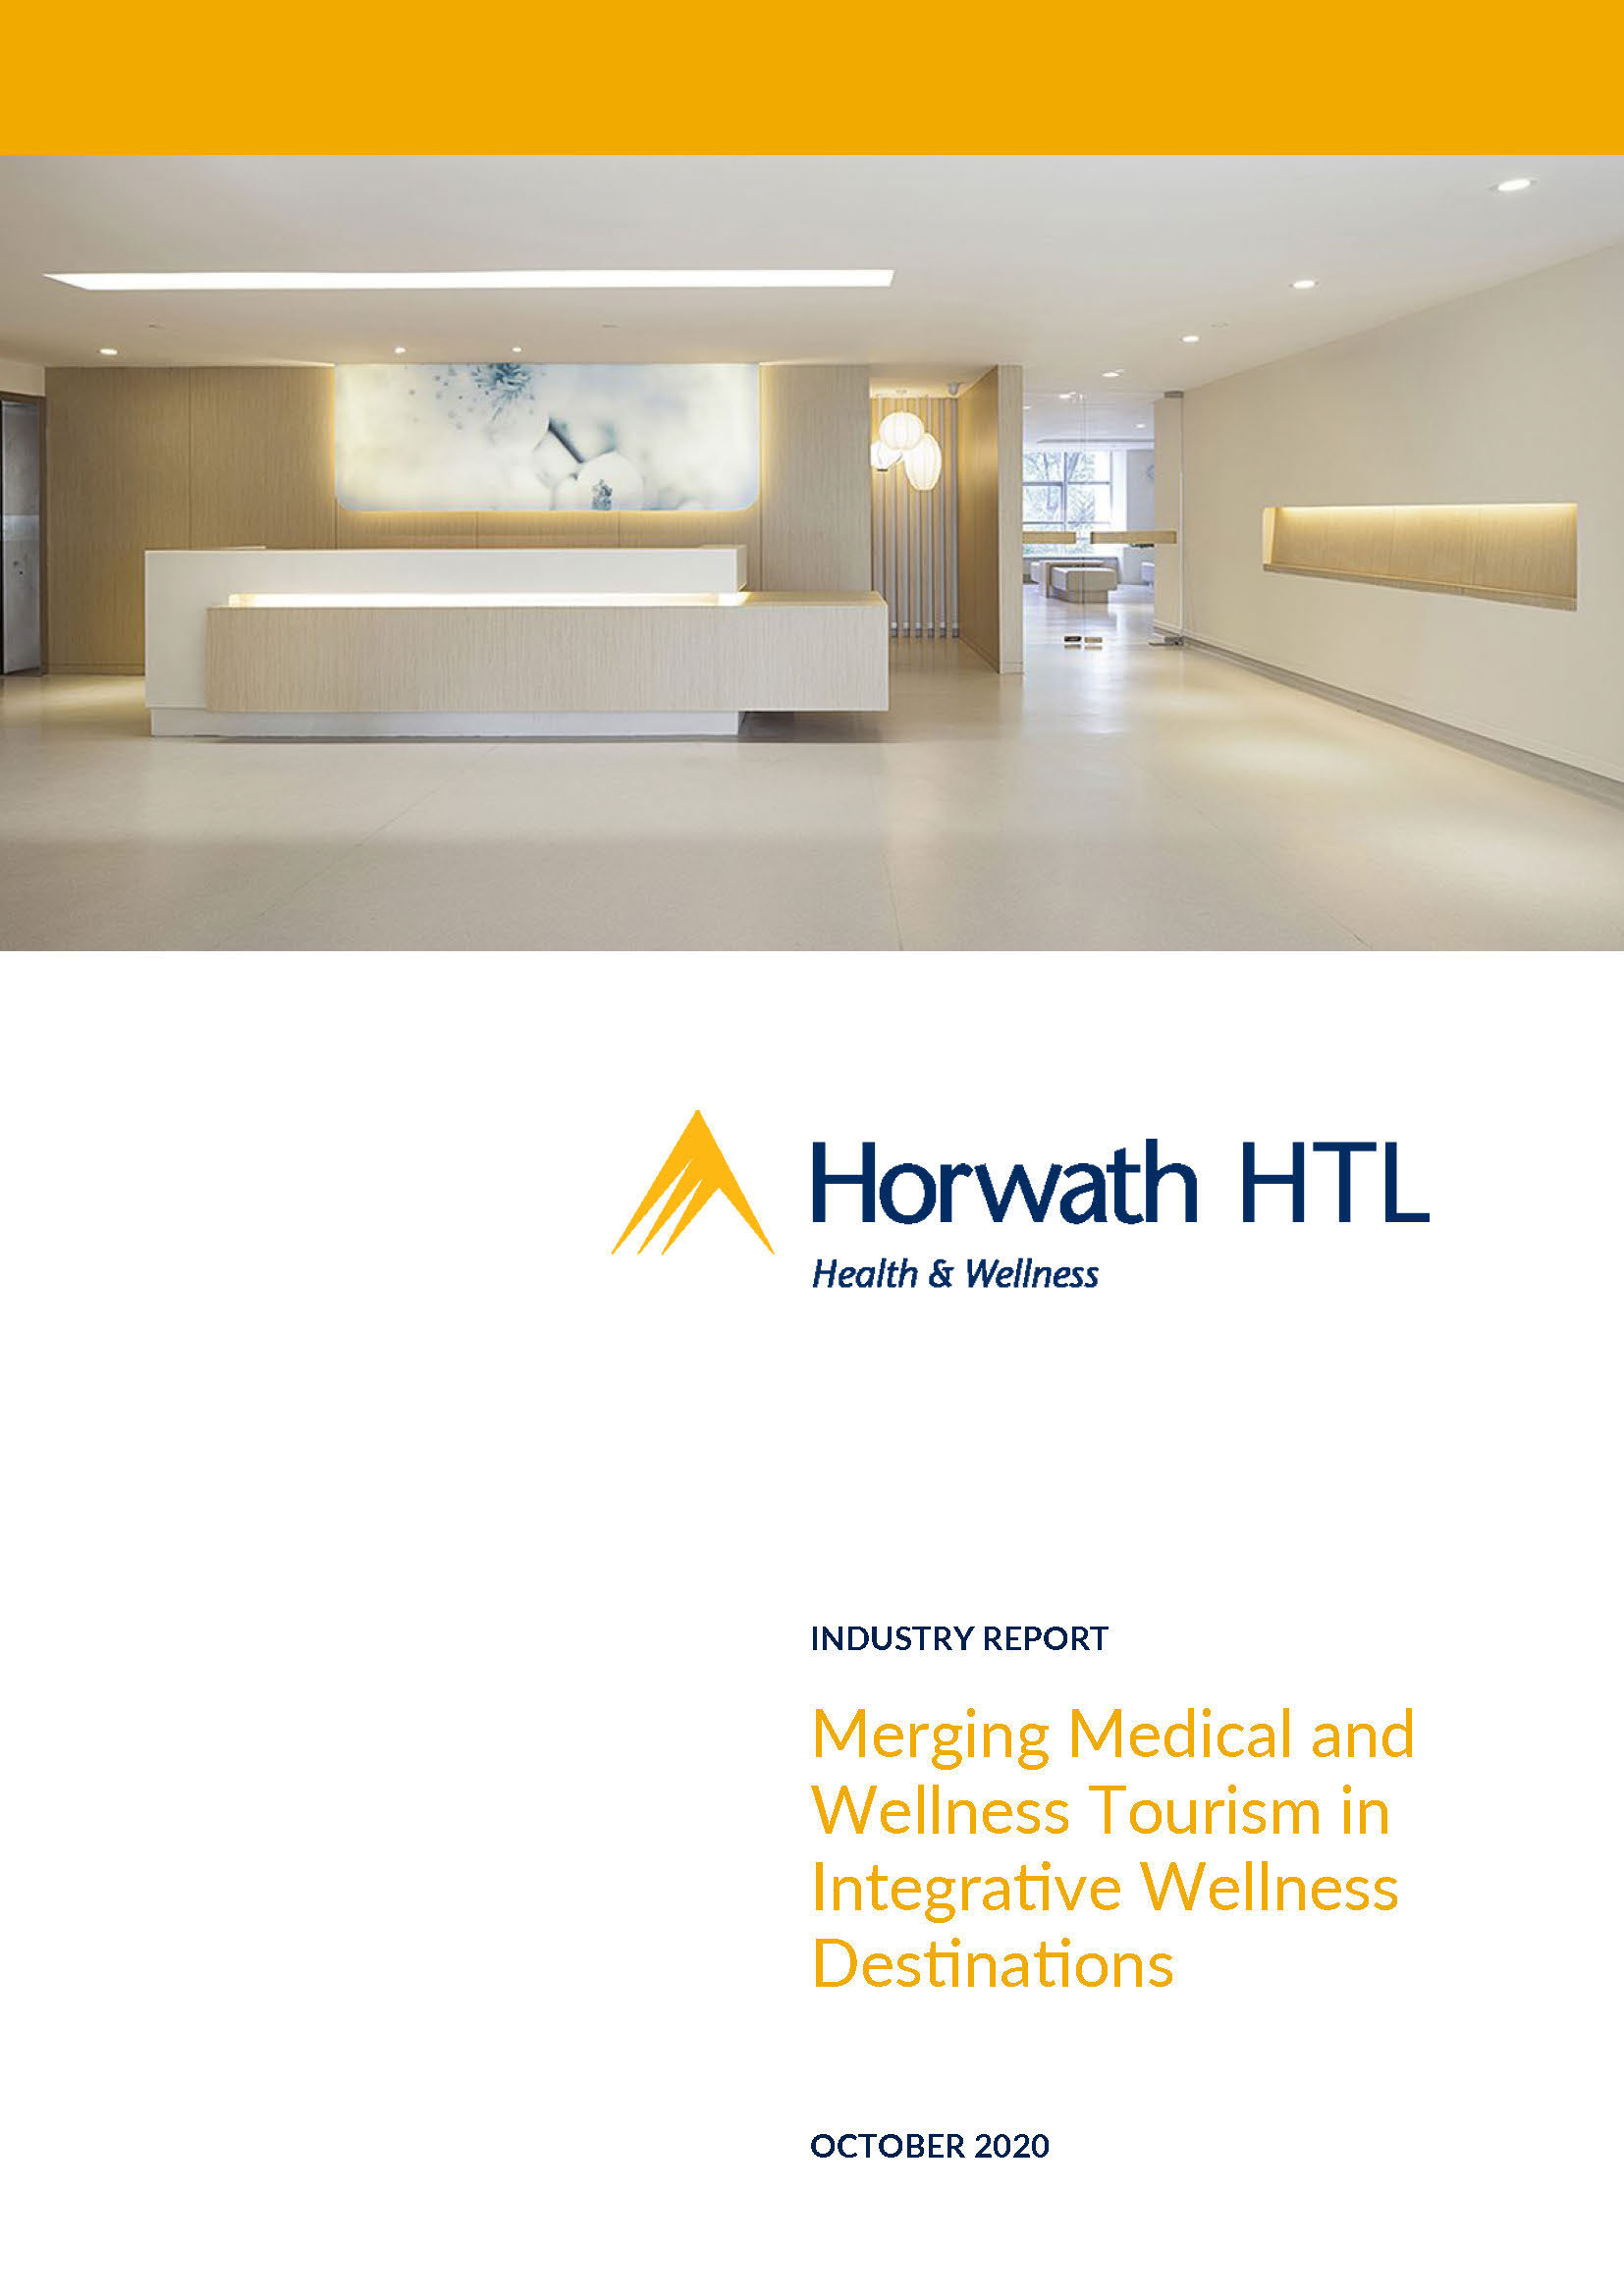 HHTL Merging Medical and Wellness Tourism Page 01